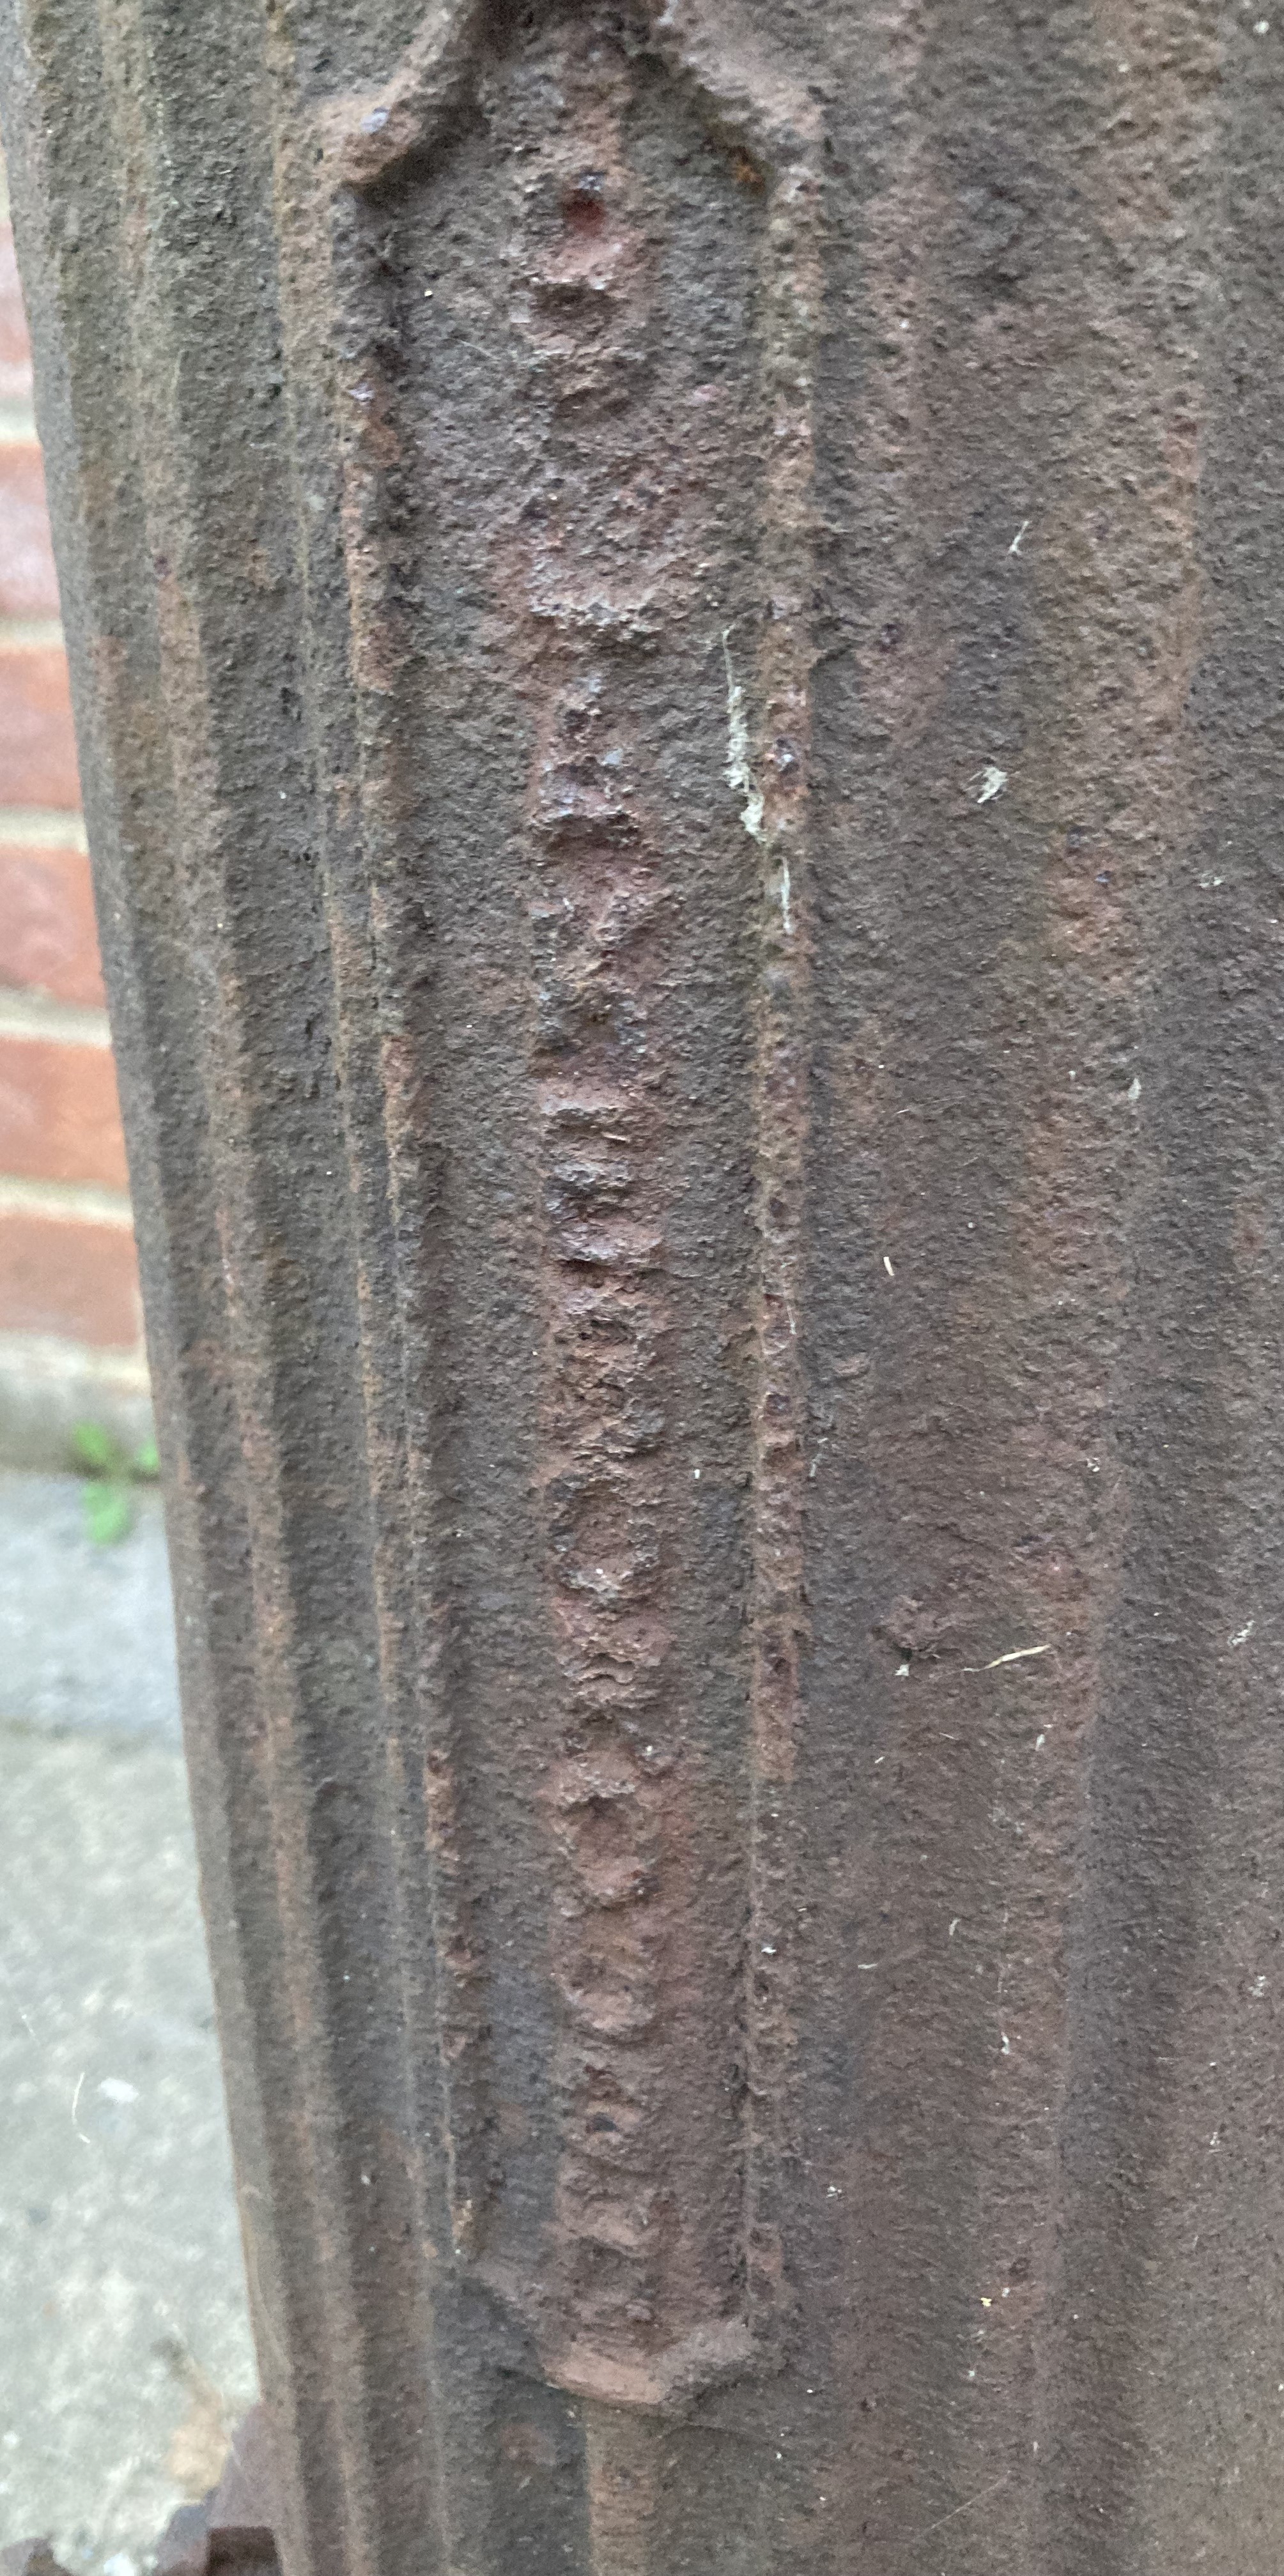 The makers name cast into the side of the Pickhill standpipe